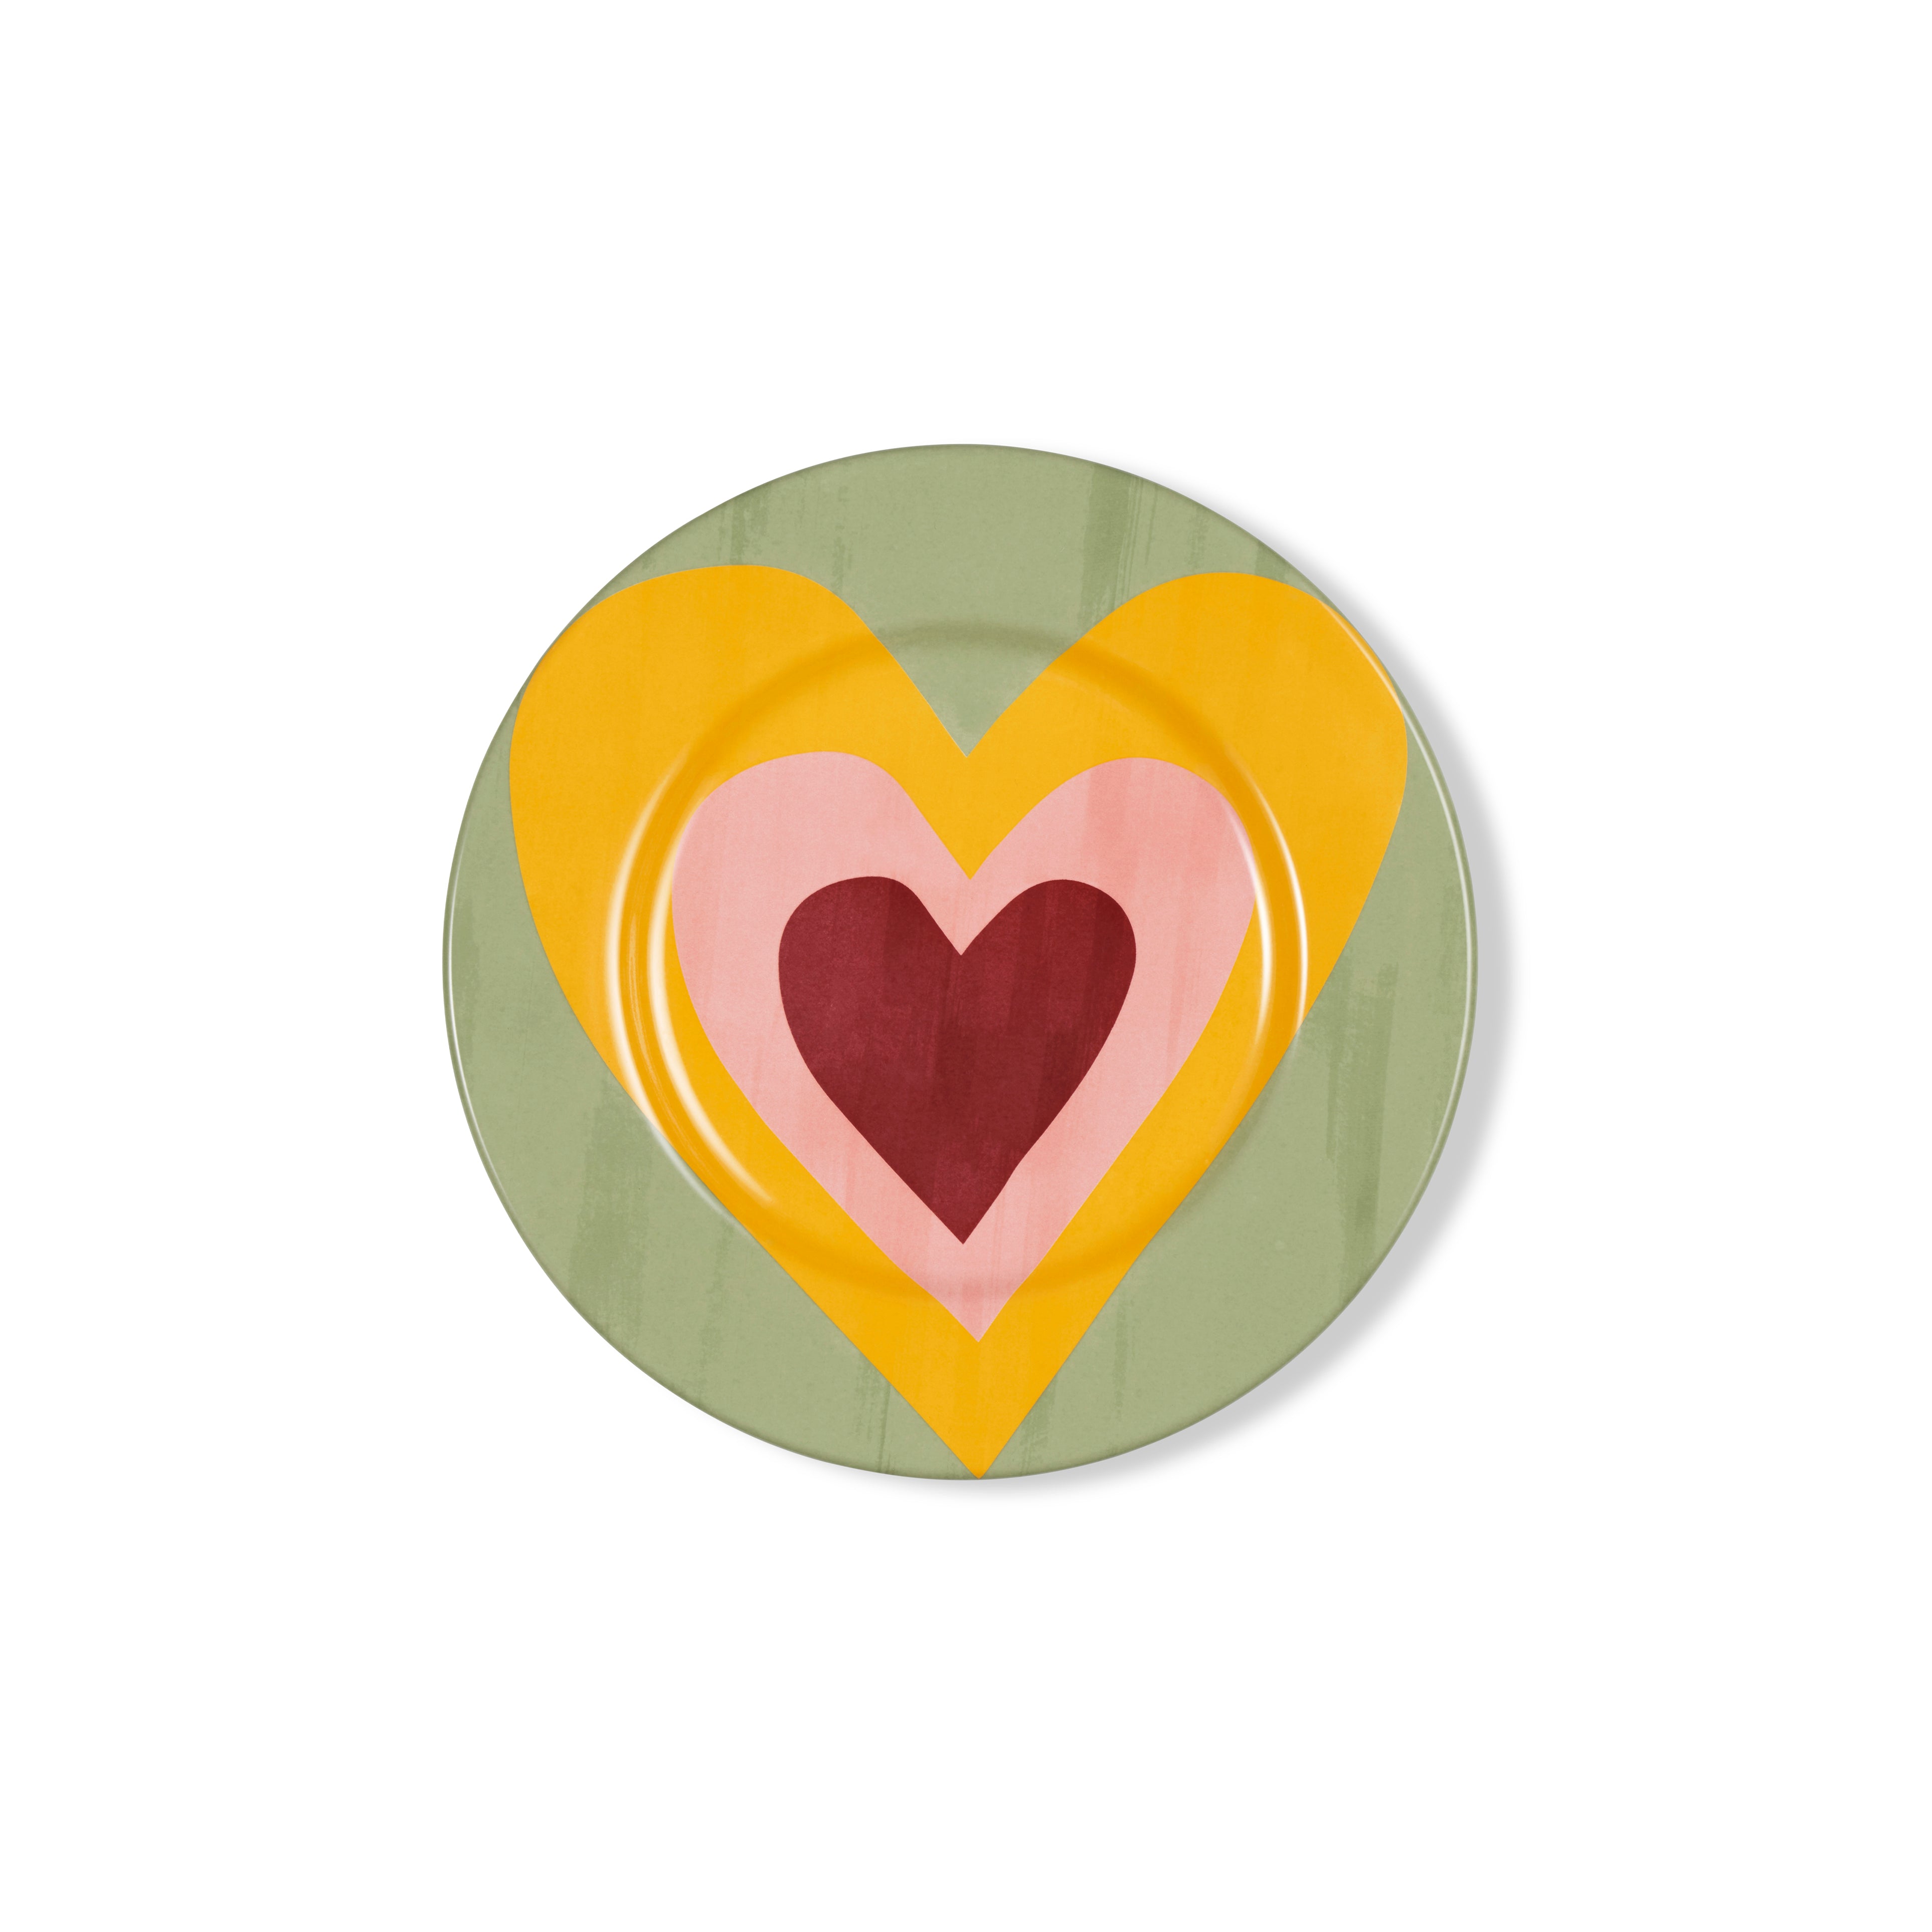 S&B Heart Side Plate in Pale Green and Lemon Yellow, 22cm